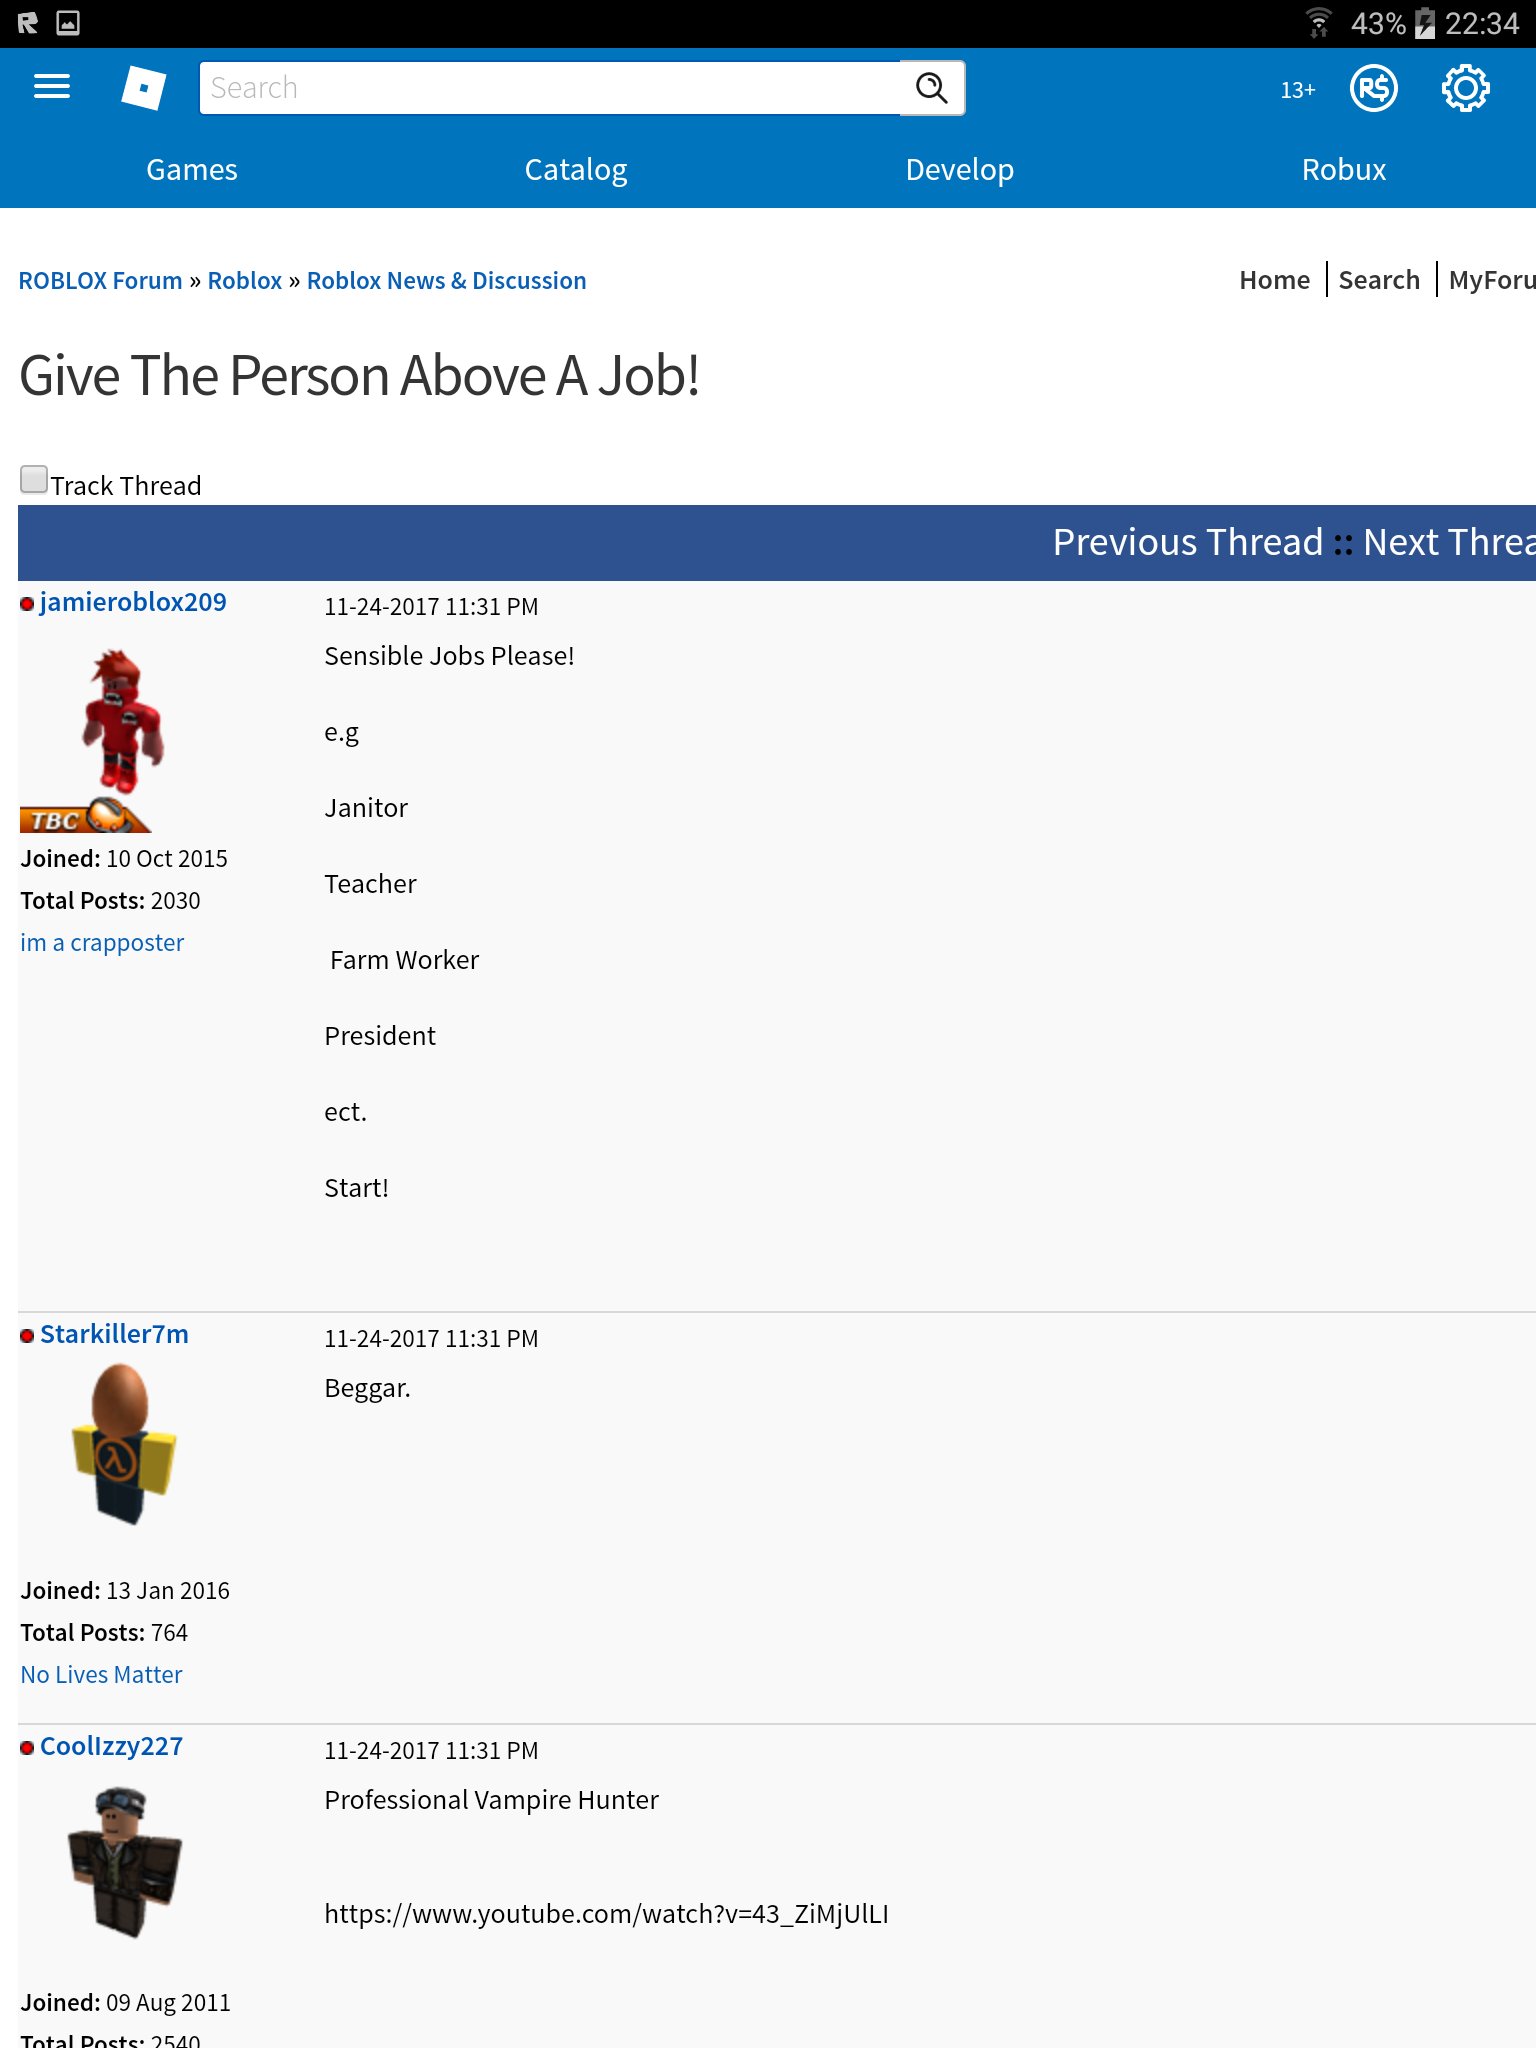 Rhyan Smith on X: Guest's have been updated! #ROBLOX